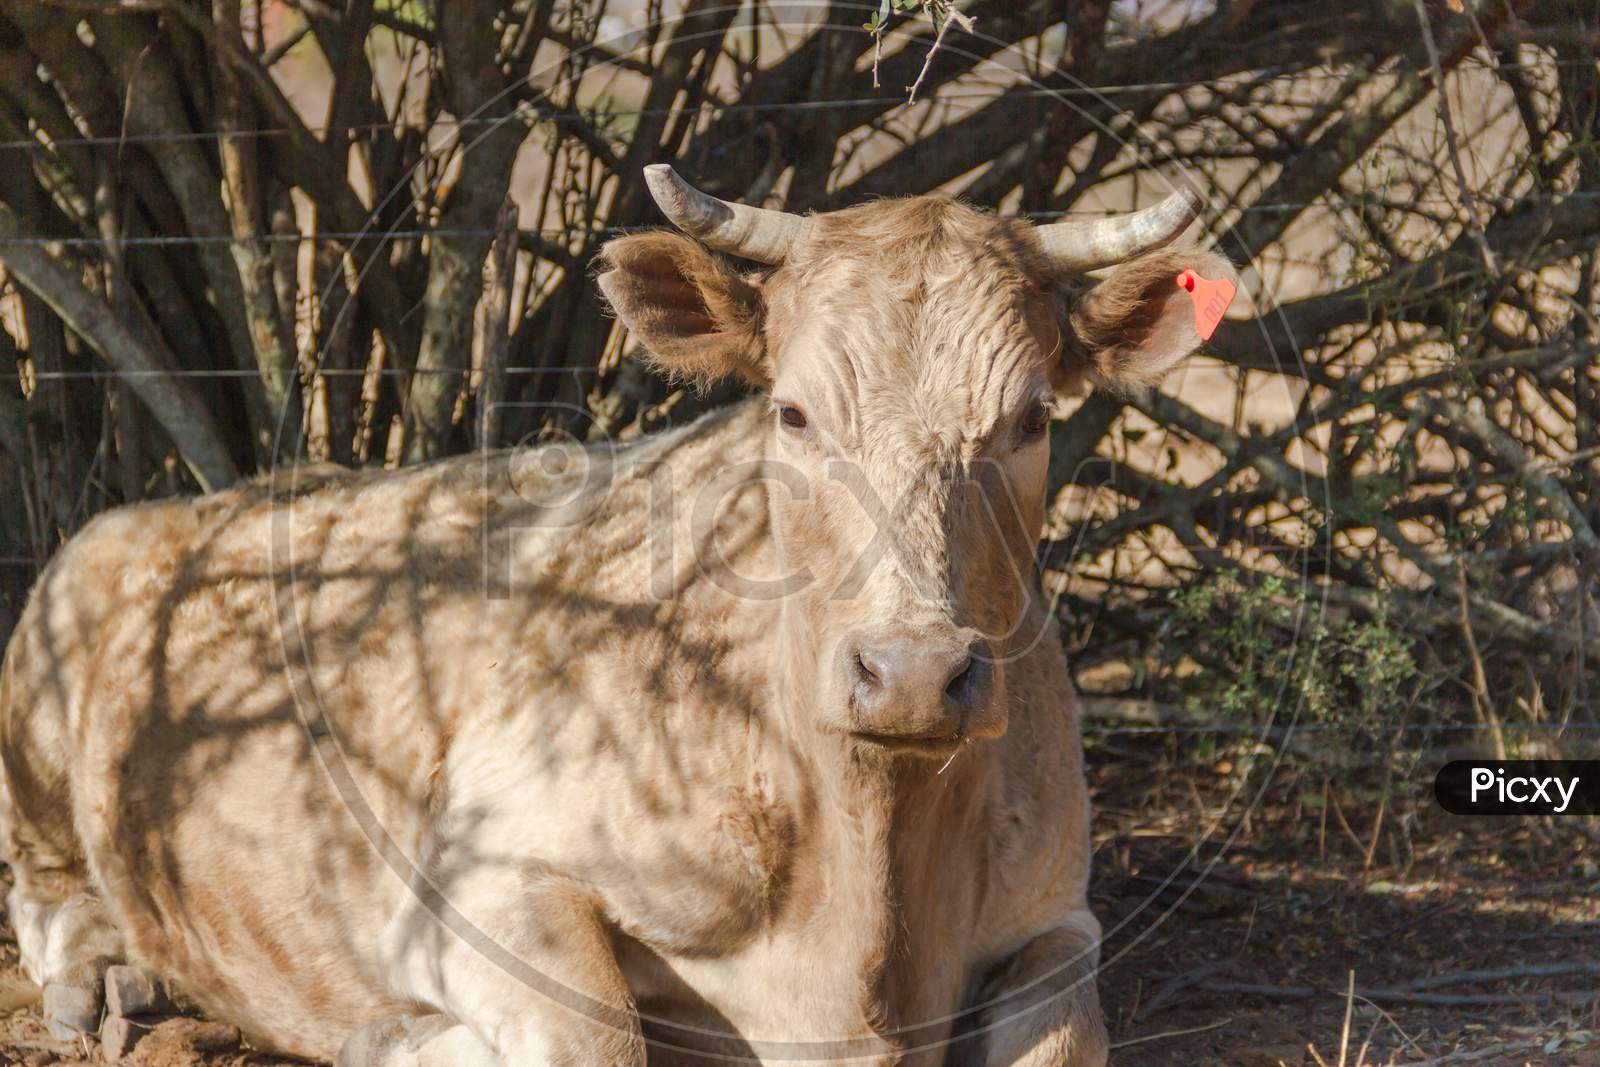 Portrait Of Dairy Cow Sitting In The Field